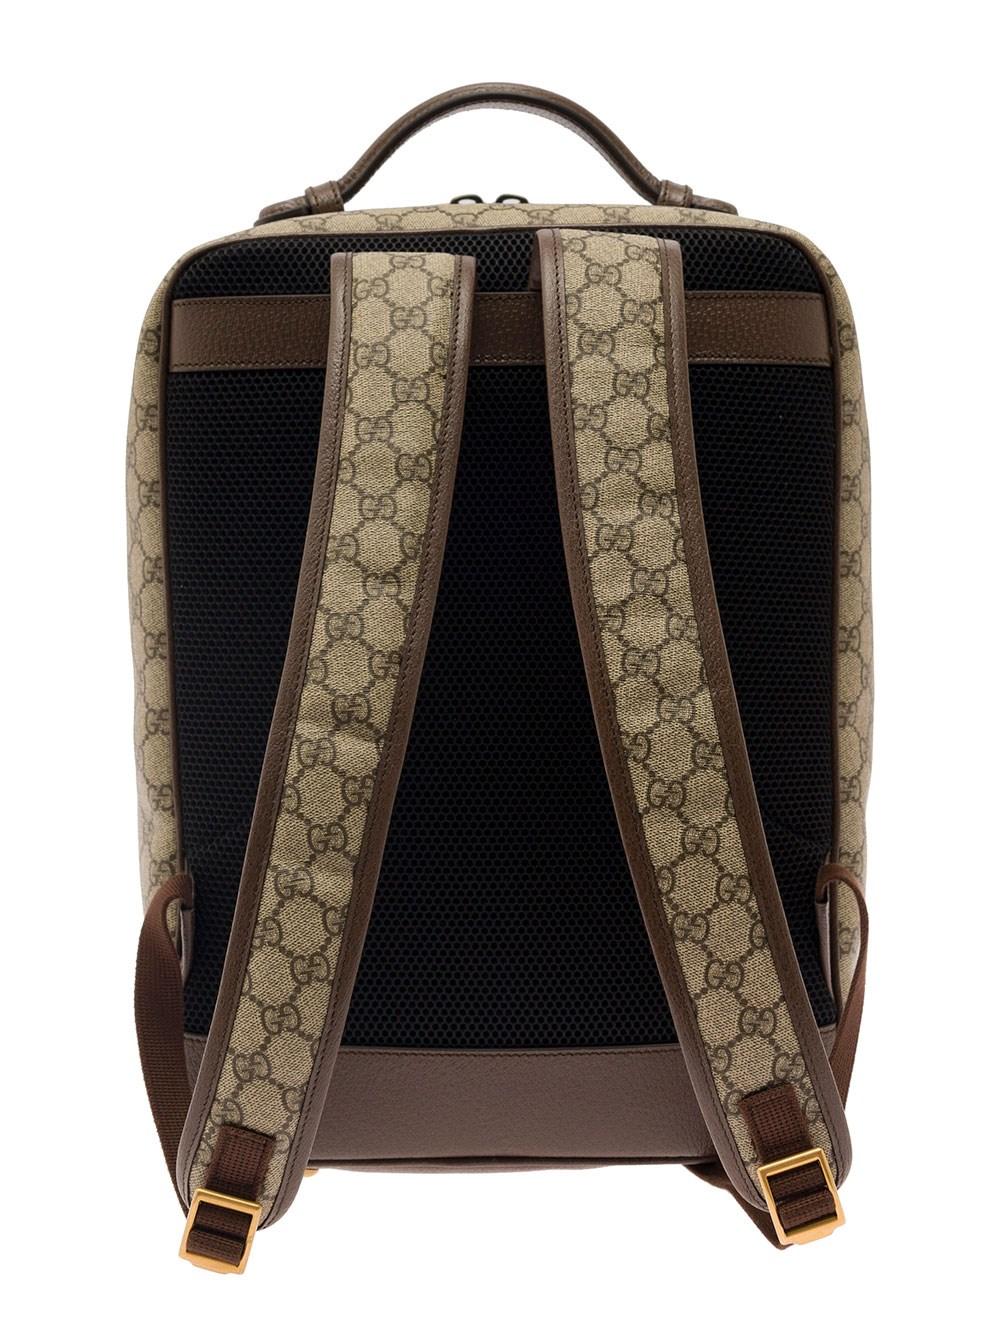 Gucci GG Supreme Canvas Backpack - Brown